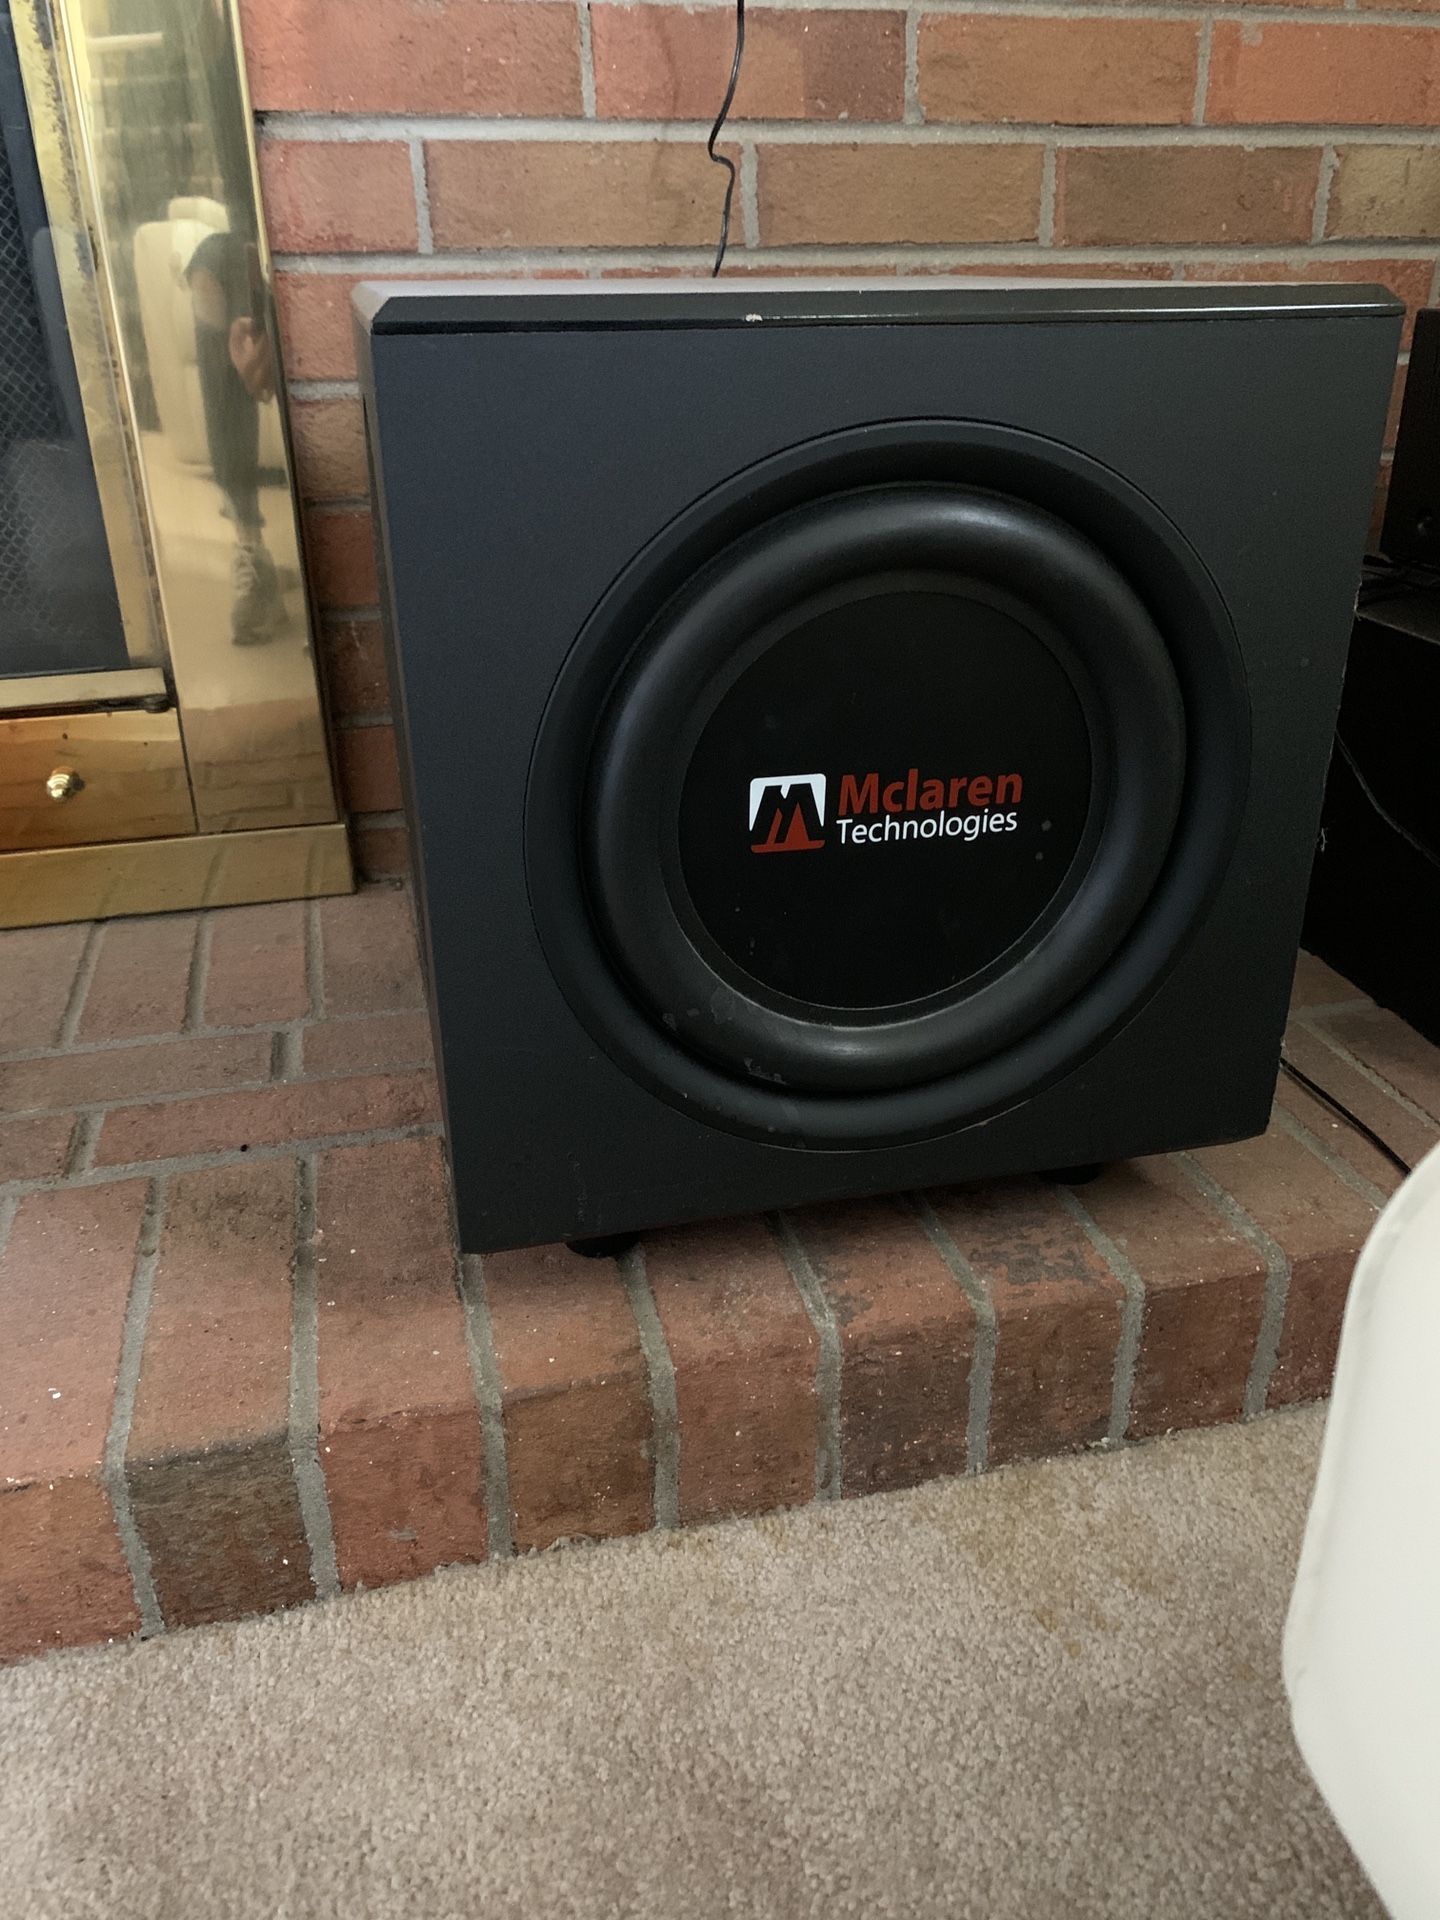 Sony receiver And Mclaren subwoofer and speakers